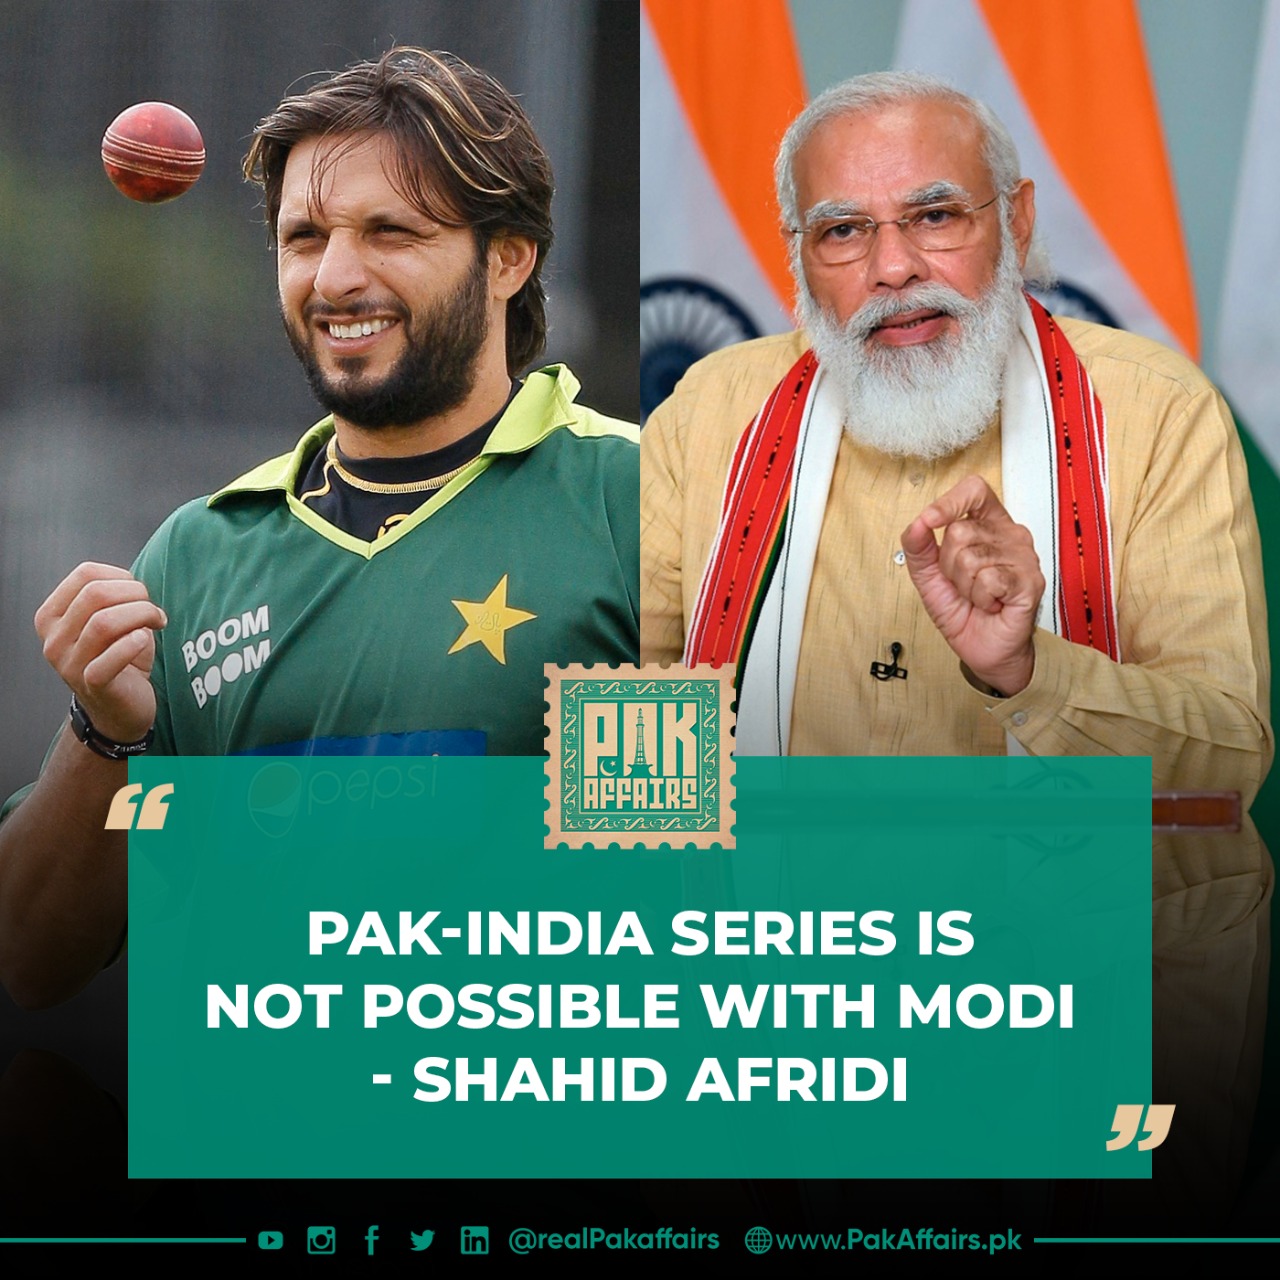 Pak-India series is not possible with Modi: Shahid Afridi.